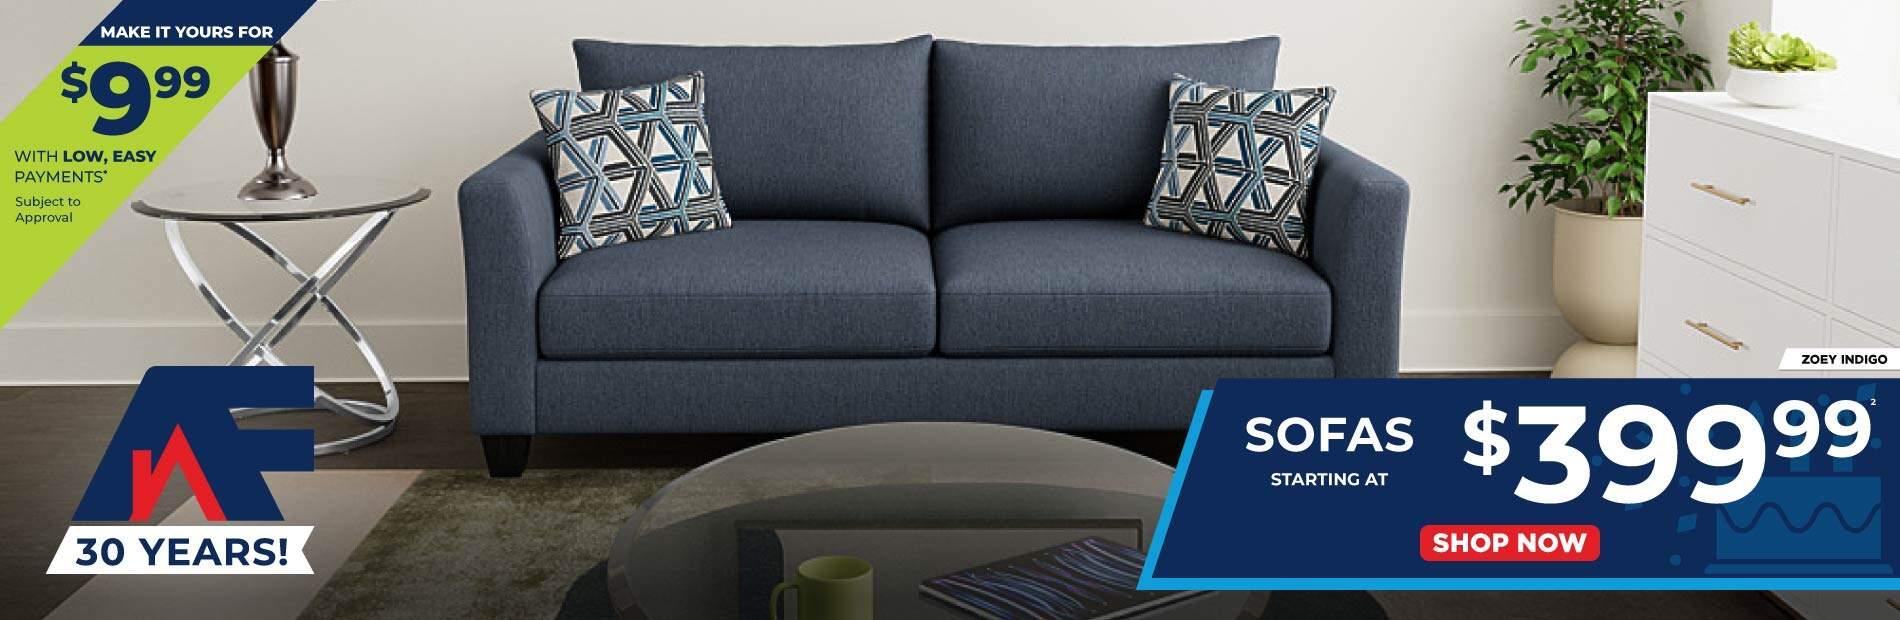 Make it yours $9.99 and no payments for 30 days subject to approval. AF 30 Years. Sofas starting at 399.99 Shop Now.